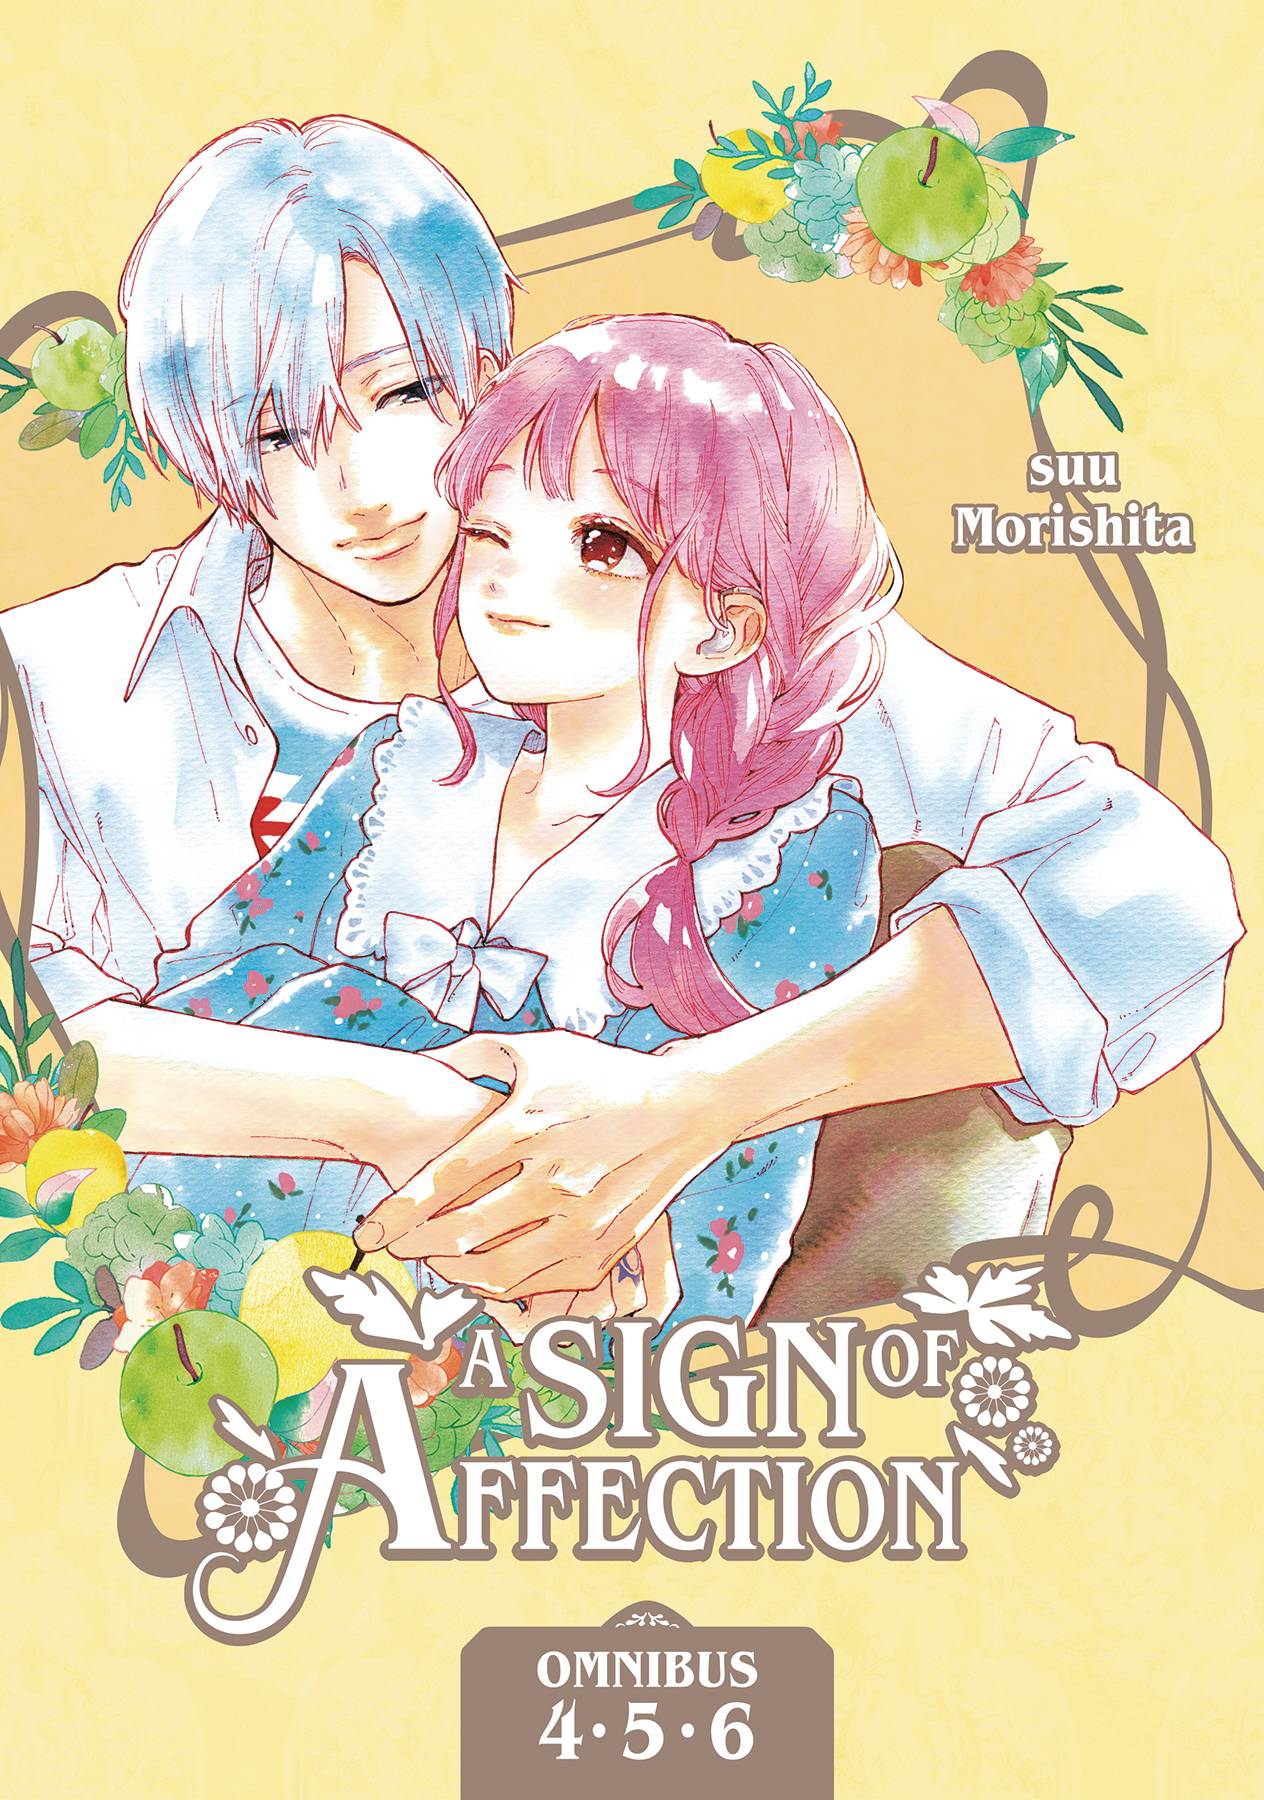 A SIGN OF AFFECTION OMNIBUS GN VOL 02 (26 Jun Release)